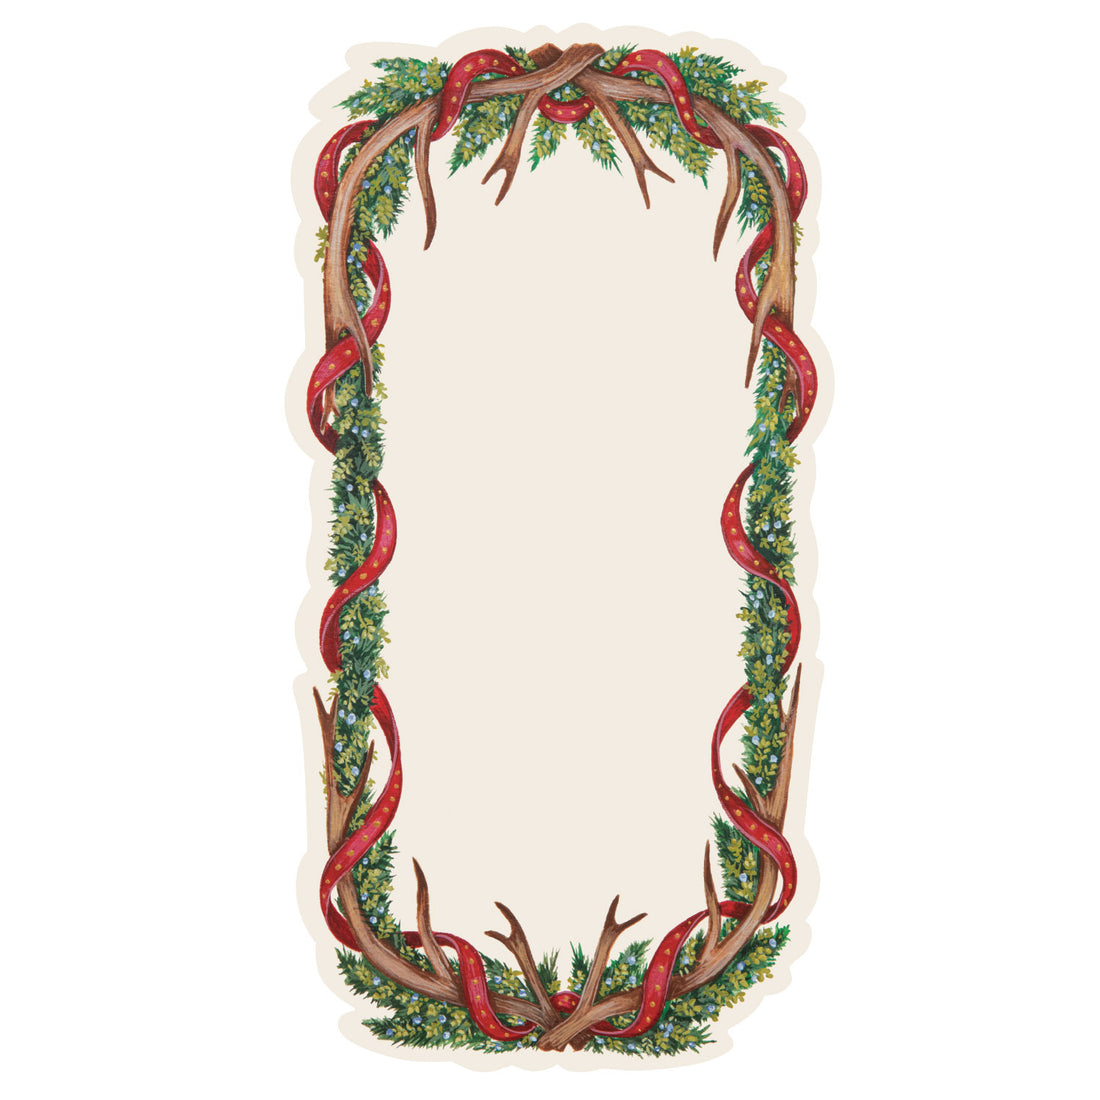 A die-cut rectangular card framed by green winter foliage sprinkled with blue berries, deer antlers, and a red ribbon wrapped around the whole frame. The middle area is a blank white rectangle for personalization.